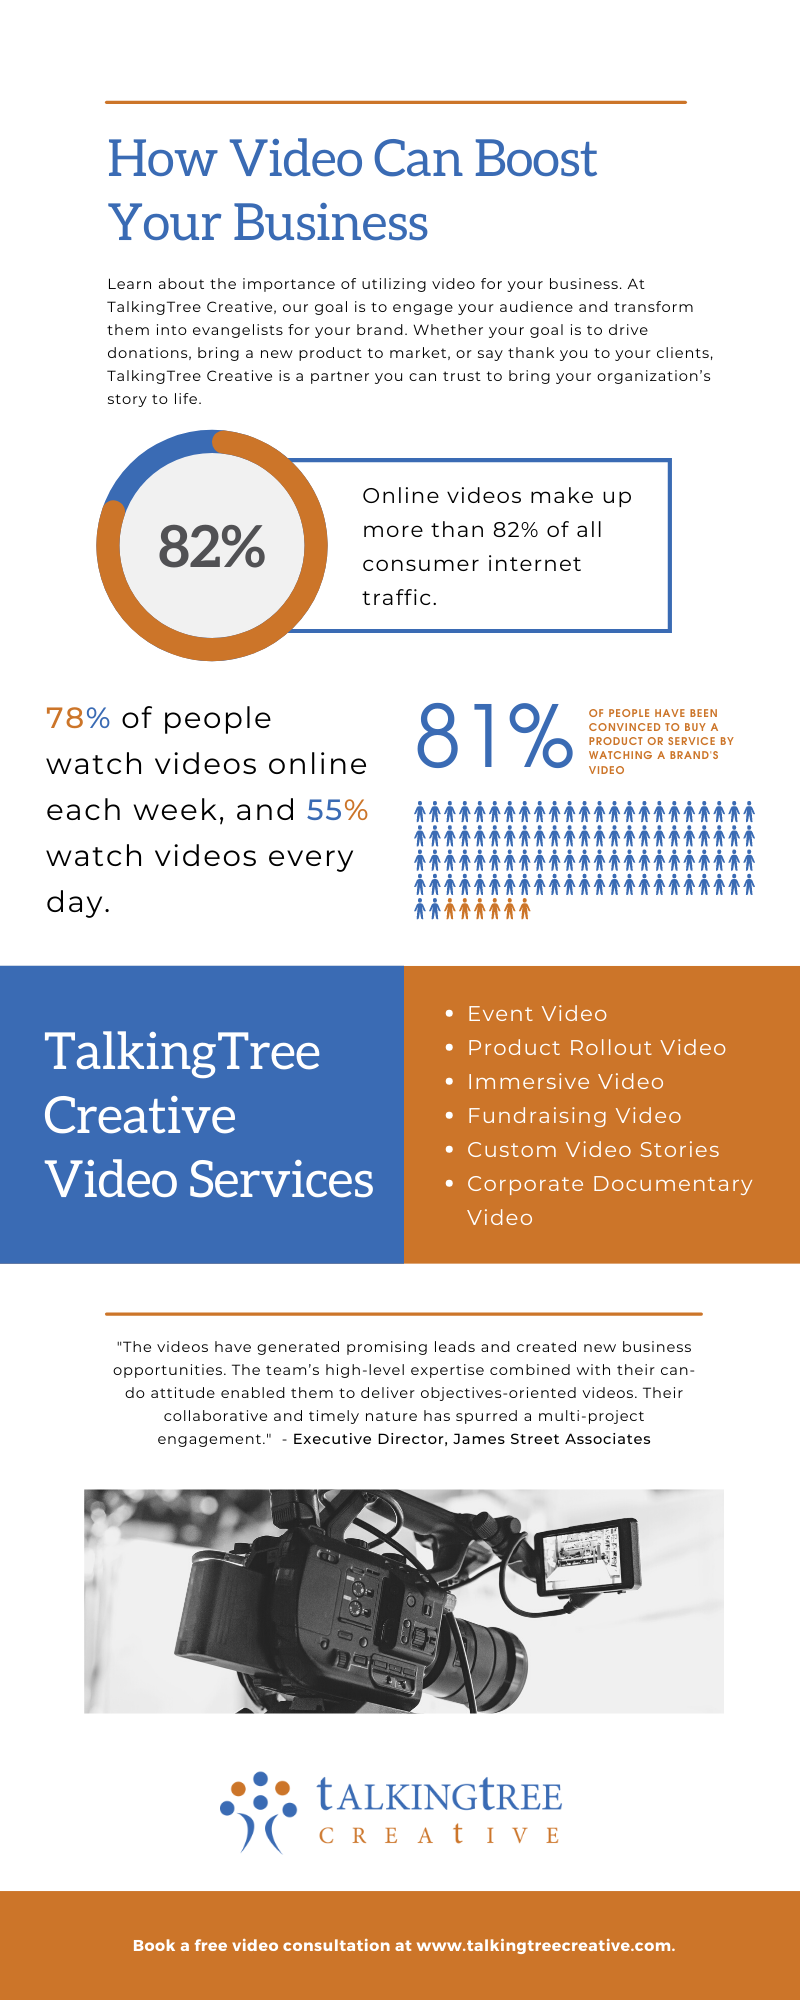 TalkingTree Creative Video Production Infographic that demonstrates the importance of utilizing video for your business